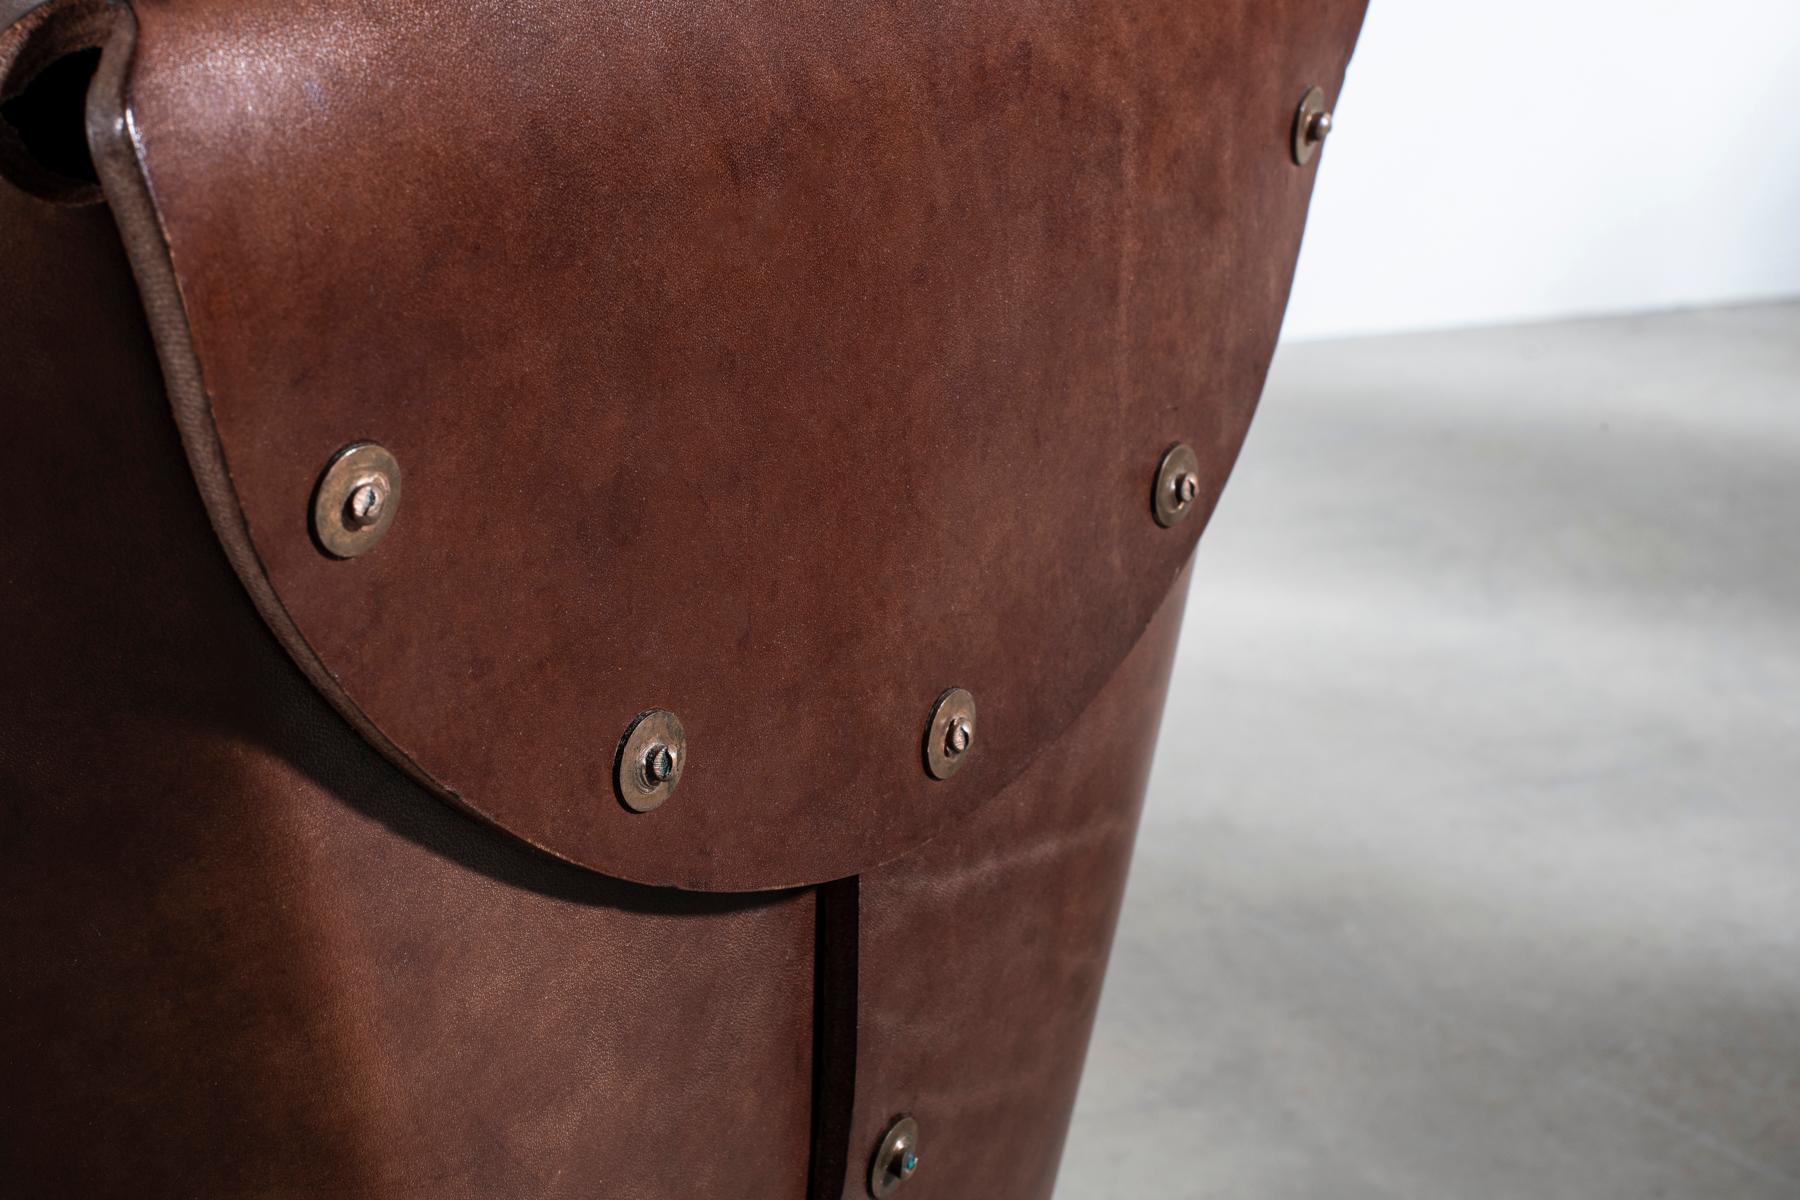 Rivet Stool II by Bill Amberg, bridle leather stool with hand-set copper rivets For Sale 3